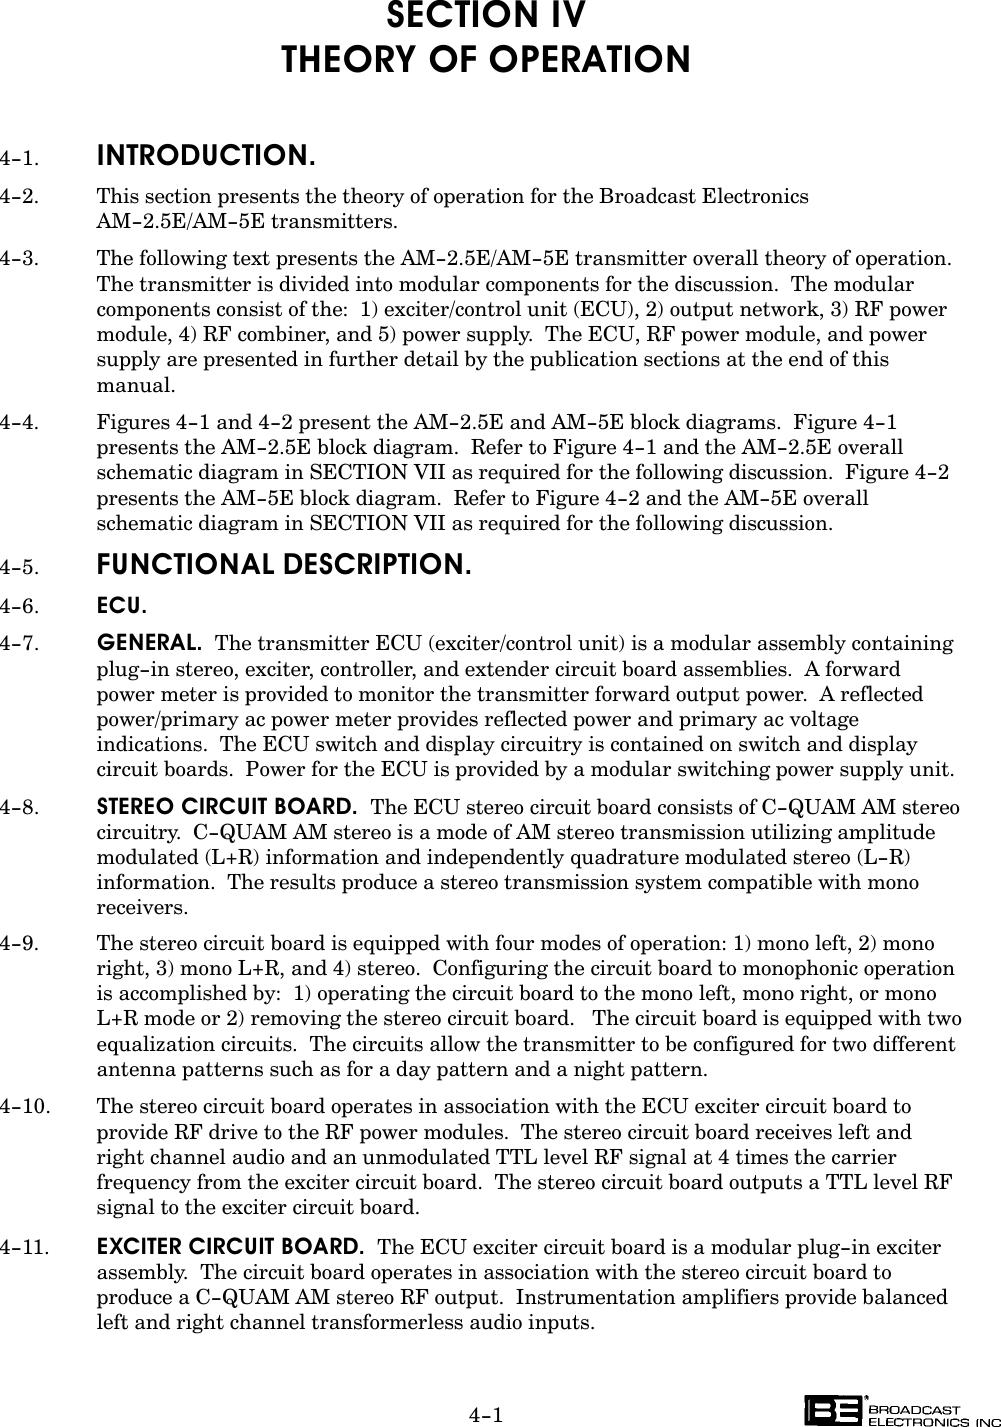 4-1SECTION IVTHEORY OF OPERATION4-1. INTRODUCTION.4-2. This section presents the theory of operation for the Broadcast ElectronicsAM-2.5E/AM-5E transmitters.4-3. The following text presents the AM-2.5E/AM-5E transmitter overall theory of operation.The transmitter is divided into modular components for the discussion.  The modularcomponents consist of the:  1) exciter/control unit (ECU), 2) output network, 3) RF powermodule, 4) RF combiner, and 5) power supply.  The ECU, RF power module, and powersupply are presented in further detail by the publication sections at the end of thismanual.4-4. Figures 4-1 and 4-2 present the AM-2.5E and AM-5E block diagrams.  Figure 4-1presents the AM-2.5E block diagram.  Refer to Figure 4-1 and the AM-2.5E overallschematic diagram in SECTION VII as required for the following discussion.  Figure 4-2presents the AM-5E block diagram.  Refer to Figure 4-2 and the AM-5E overall schematic diagram in SECTION VII as required for the following discussion.4-5. FUNCTIONAL DESCRIPTION.4-6. ECU.4-7. GENERAL.  The transmitter ECU (exciter/control unit) is a modular assembly containingplug-in stereo, exciter, controller, and extender circuit board assemblies.  A forward power meter is provided to monitor the transmitter forward output power.  A reflectedpower/primary ac power meter provides reflected power and primary ac voltageindications.  The ECU switch and display circuitry is contained on switch and displaycircuit boards.  Power for the ECU is provided by a modular switching power supply unit.4-8. STEREO CIRCUIT BOARD.  The ECU stereo circuit board consists of C-QUAM AM stereocircuitry.  C-QUAM AM stereo is a mode of AM stereo transmission utilizing amplitudemodulated (L+R) information and independently quadrature modulated stereo (L-R)information.  The results produce a stereo transmission system compatible with monoreceivers.4-9. The stereo circuit board is equipped with four modes of operation: 1) mono left, 2) monoright, 3) mono L+R, and 4) stereo.  Configuring the circuit board to monophonic operationis accomplished by:  1) operating the circuit board to the mono left, mono right, or monoL+R mode or 2) removing the stereo circuit board.   The circuit board is equipped with twoequalization circuits.  The circuits allow the transmitter to be configured for two differentantenna patterns such as for a day pattern and a night pattern.4-10. The stereo circuit board operates in association with the ECU exciter circuit board toprovide RF drive to the RF power modules.  The stereo circuit board receives left and right channel audio and an unmodulated TTL level RF signal at 4 times the carrierfrequency from the exciter circuit board.  The stereo circuit board outputs a TTL level RFsignal to the exciter circuit board.4-11. EXCITER CIRCUIT BOARD.  The ECU exciter circuit board is a modular plug-in exciterassembly.  The circuit board operates in association with the stereo circuit board to produce a C-QUAM AM stereo RF output.  Instrumentation amplifiers provide balancedleft and right channel transformerless audio inputs.